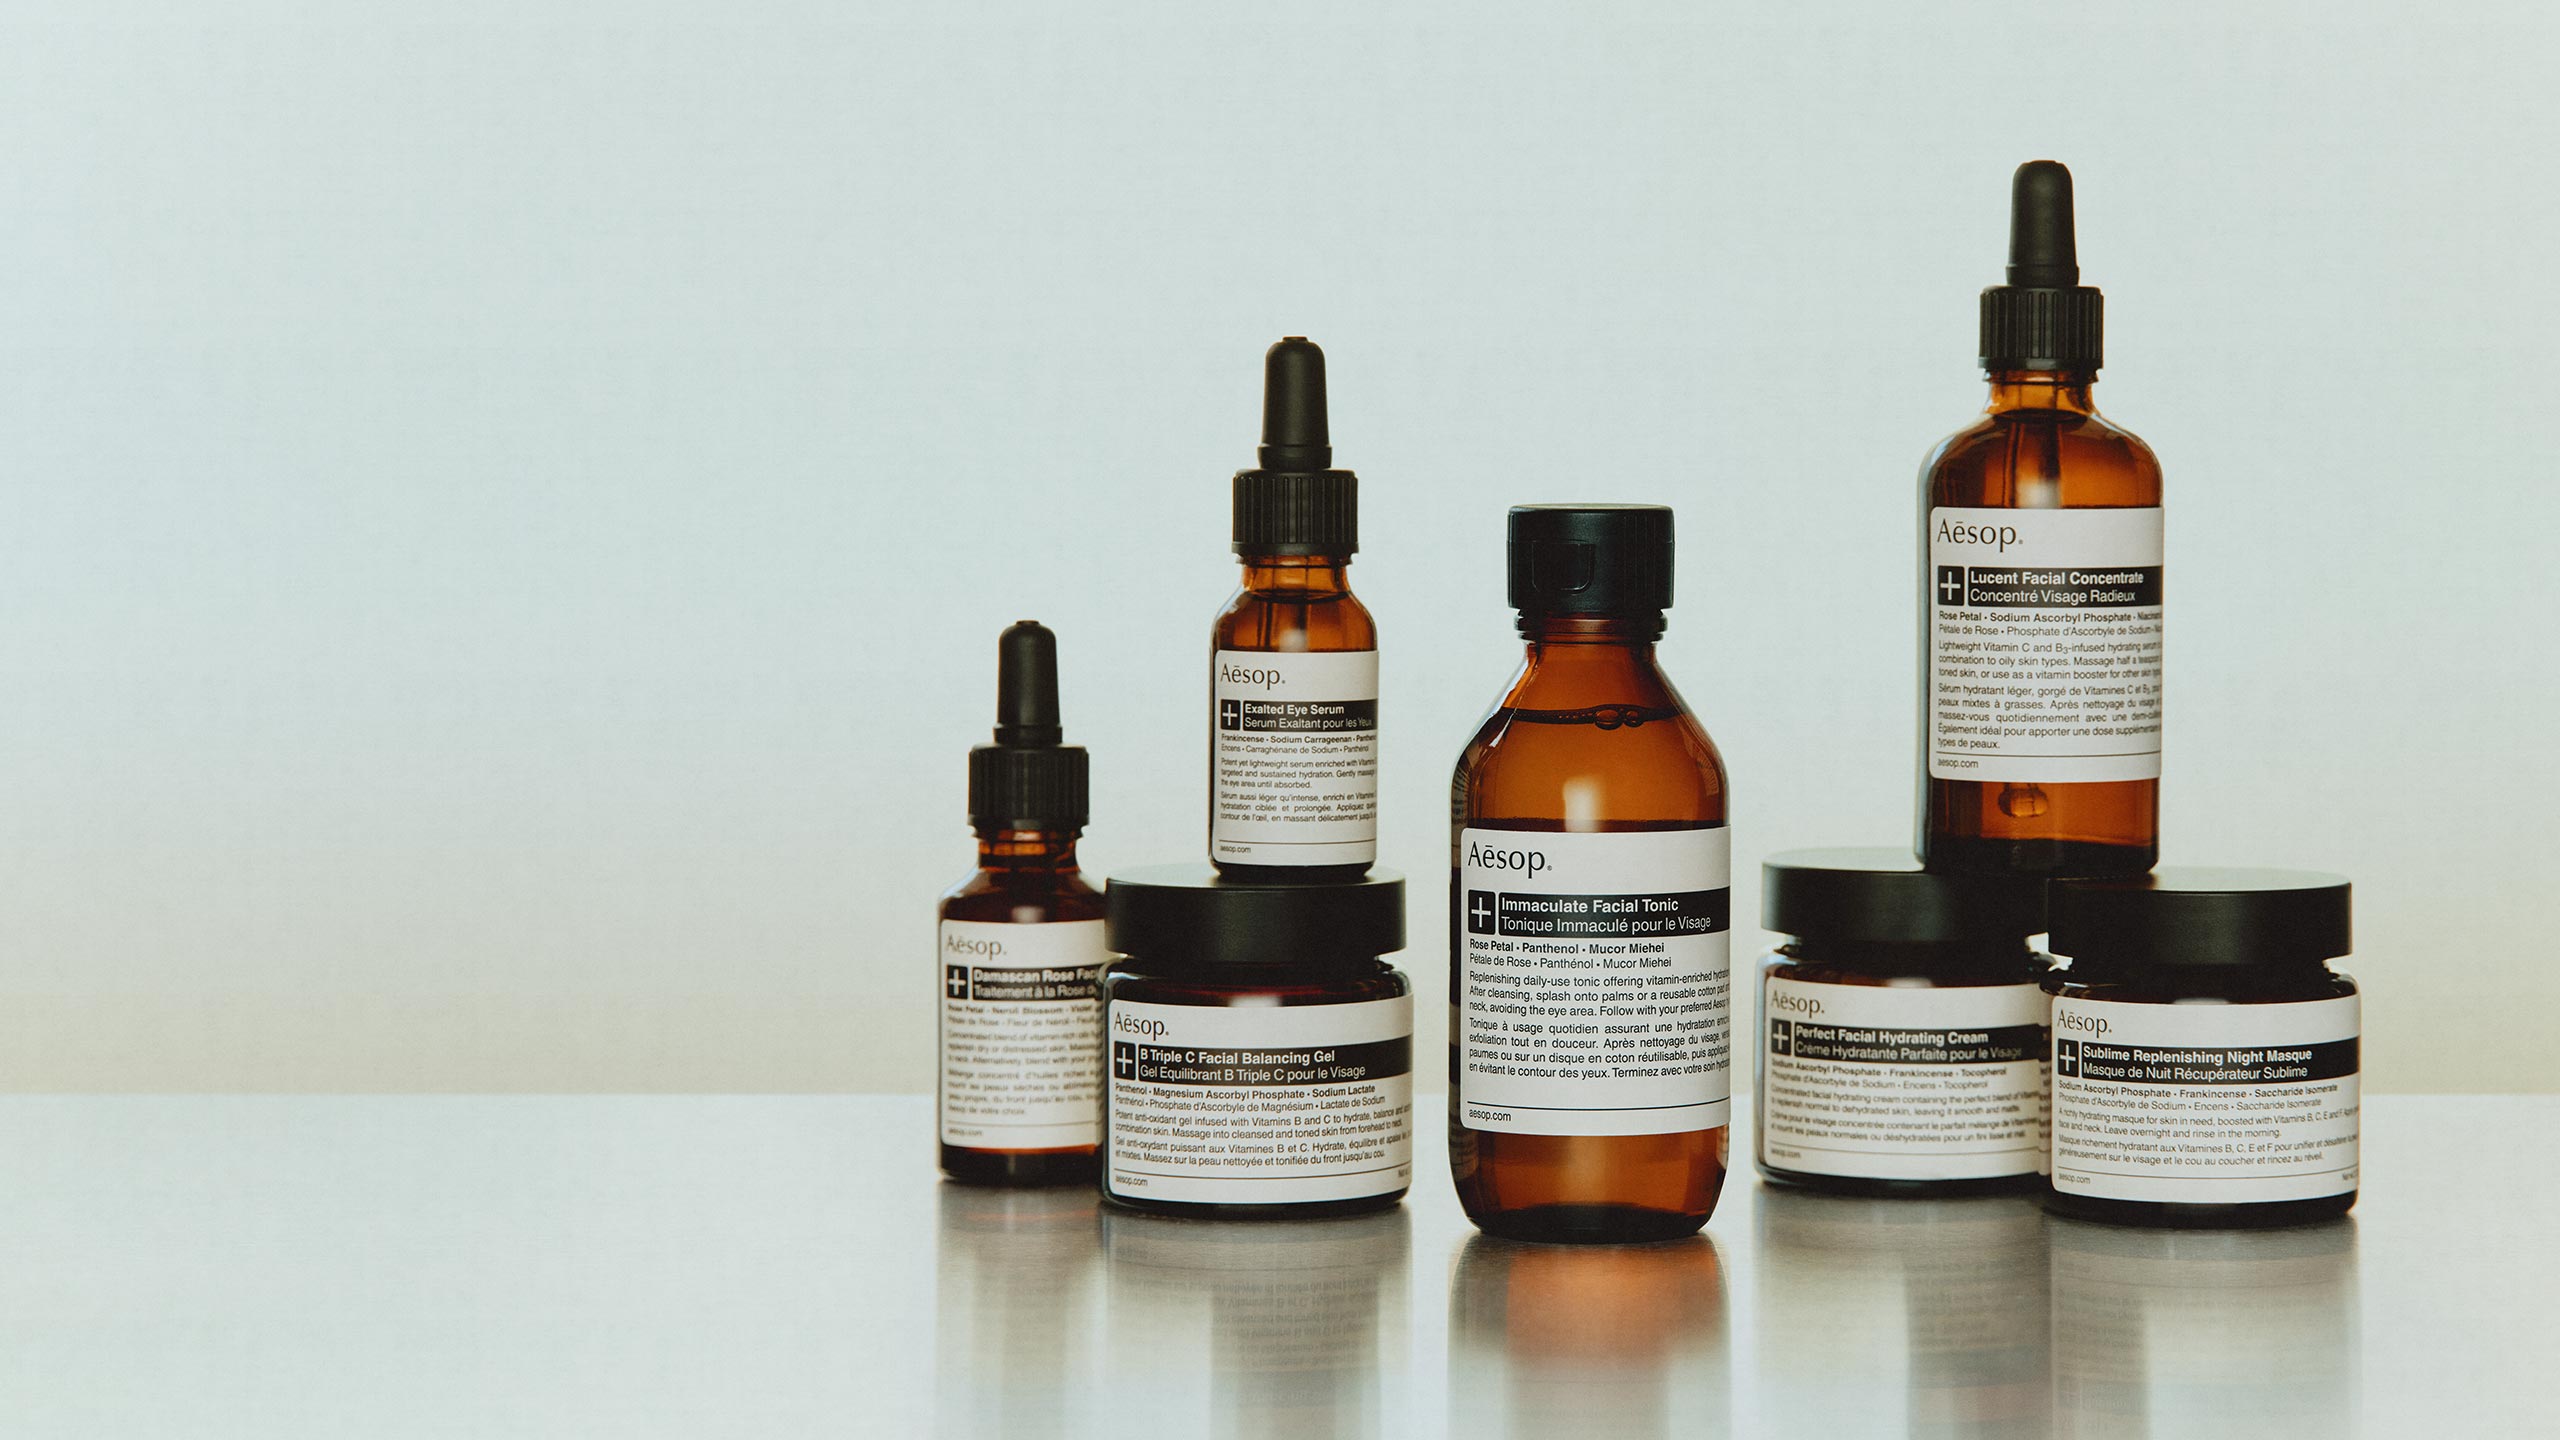 Aesop skincare plus range products placed on a metalic surface